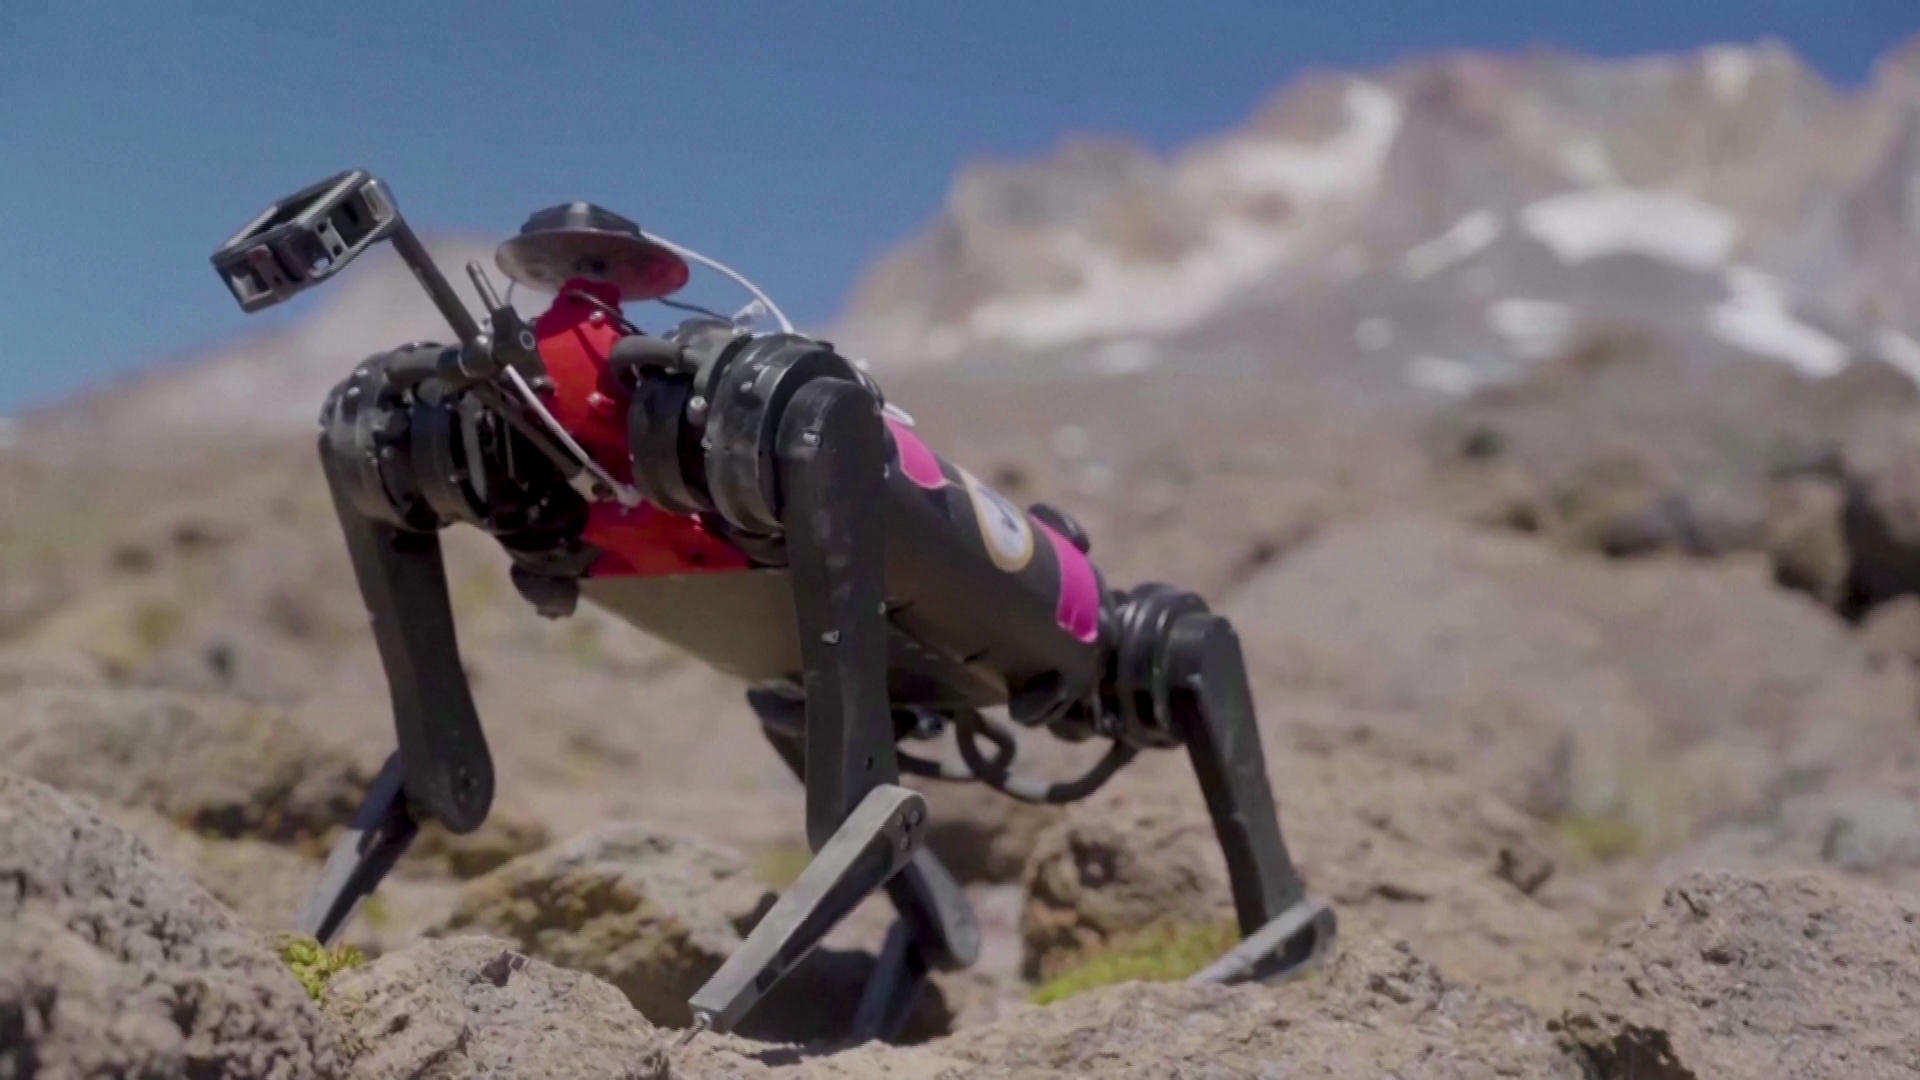 Four-legged “dog robot” could walk alongside humans on the Moon | Newsfeed